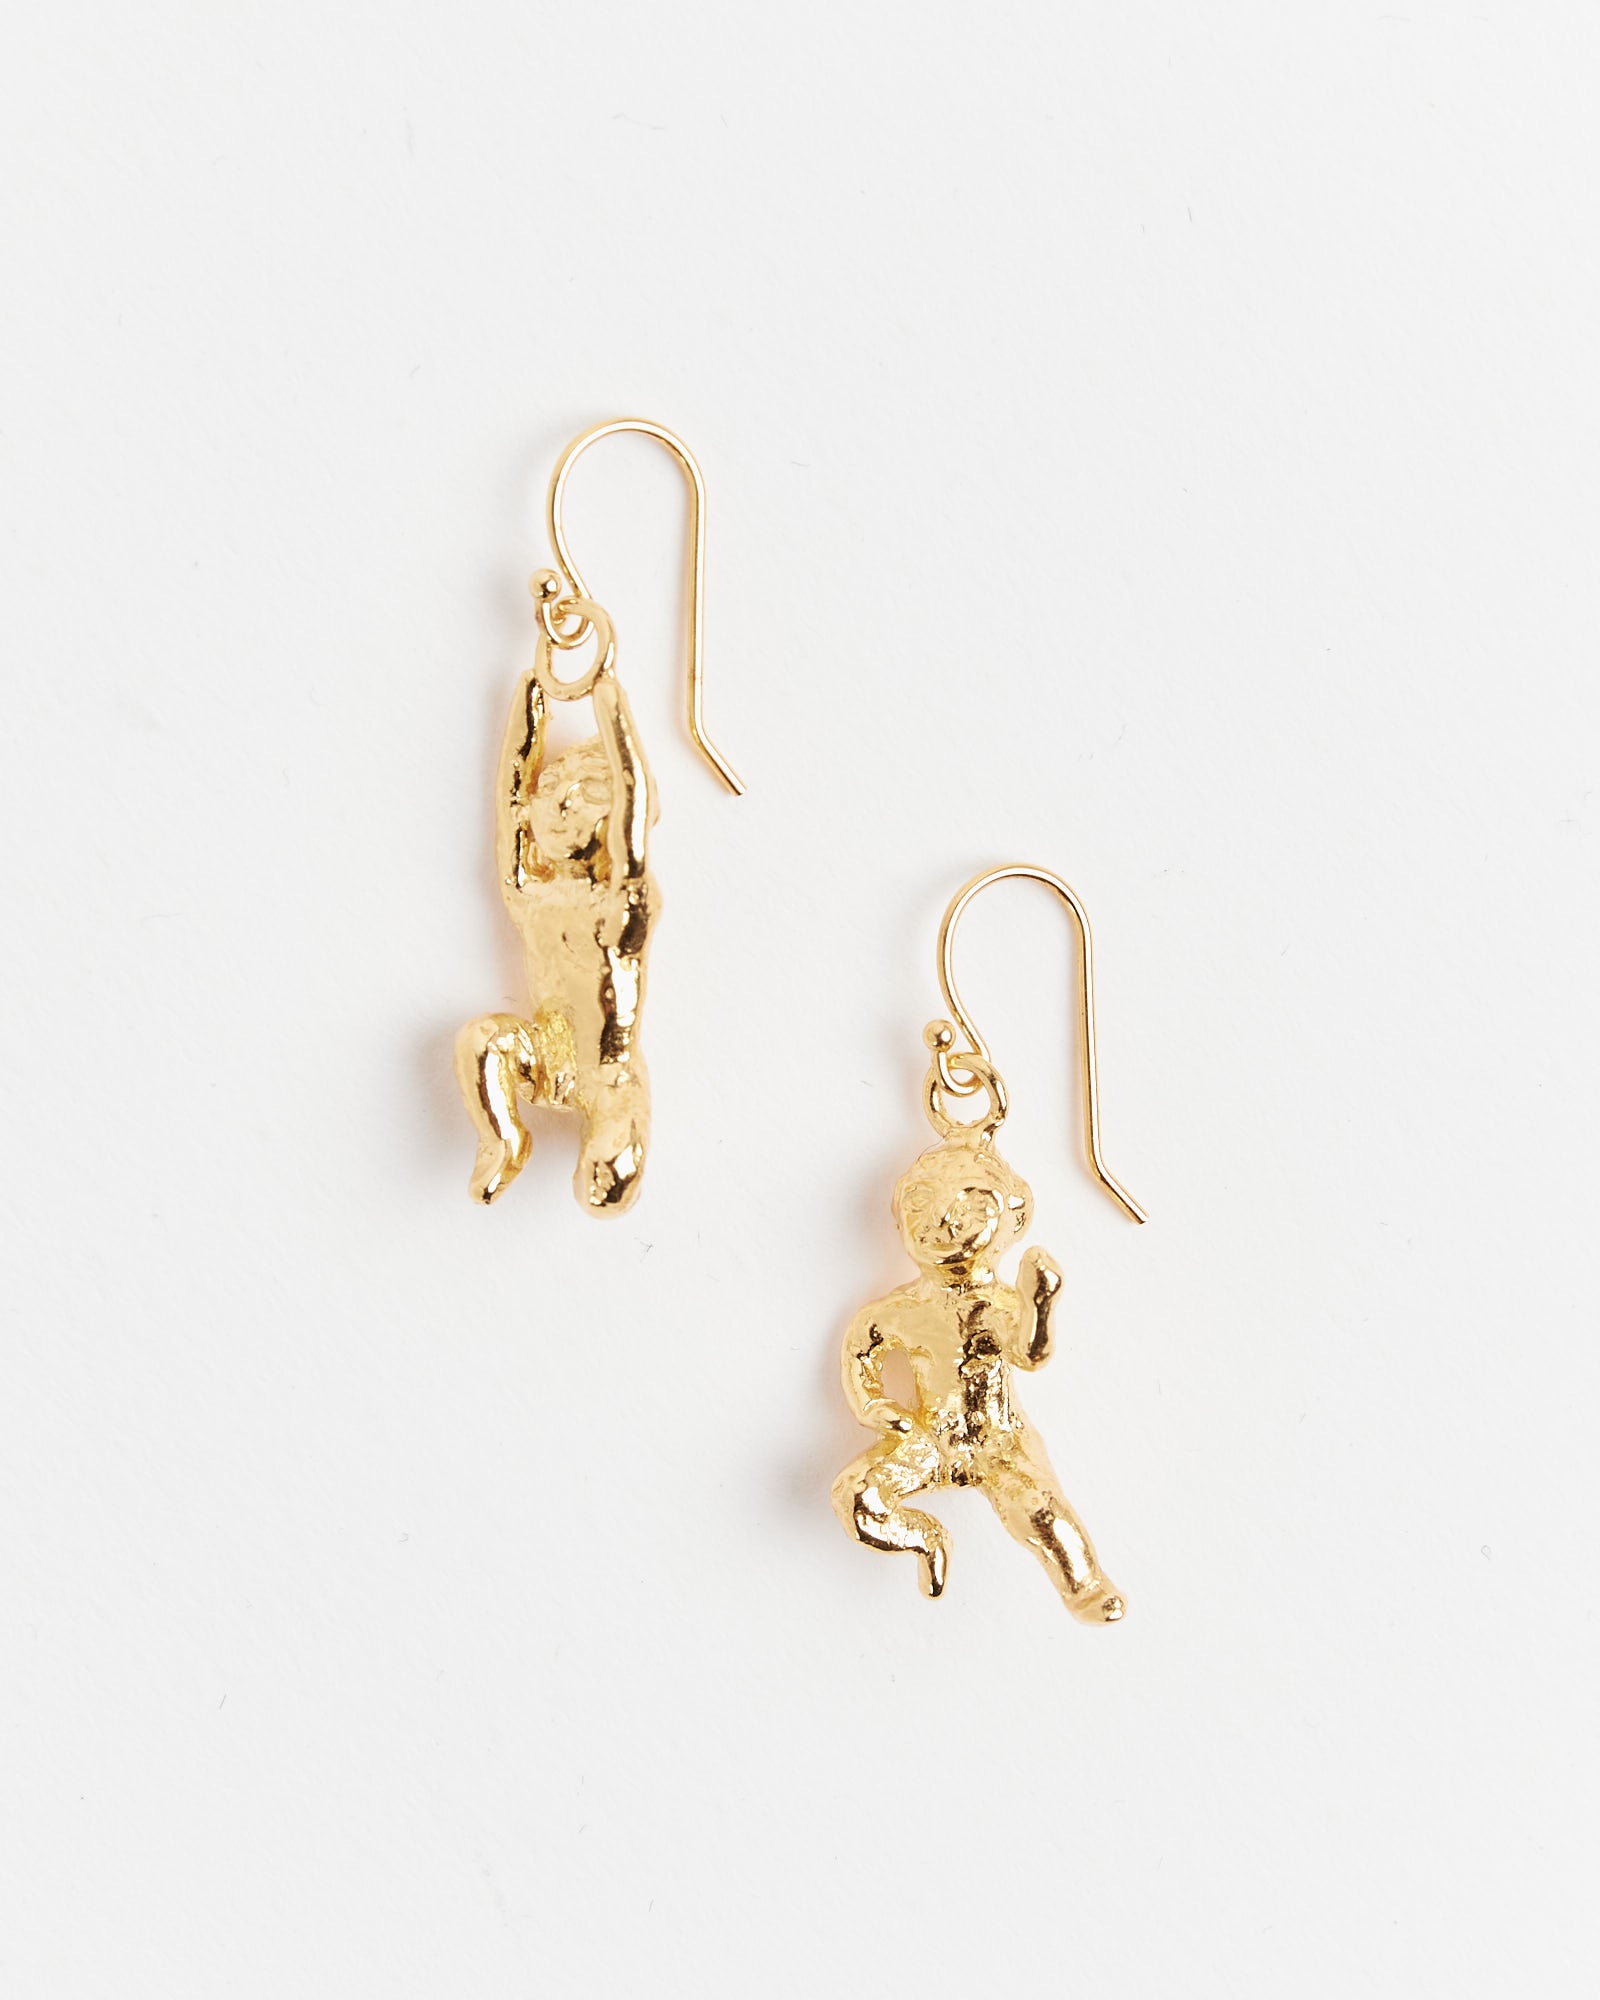 Remus and Romulus Earrings